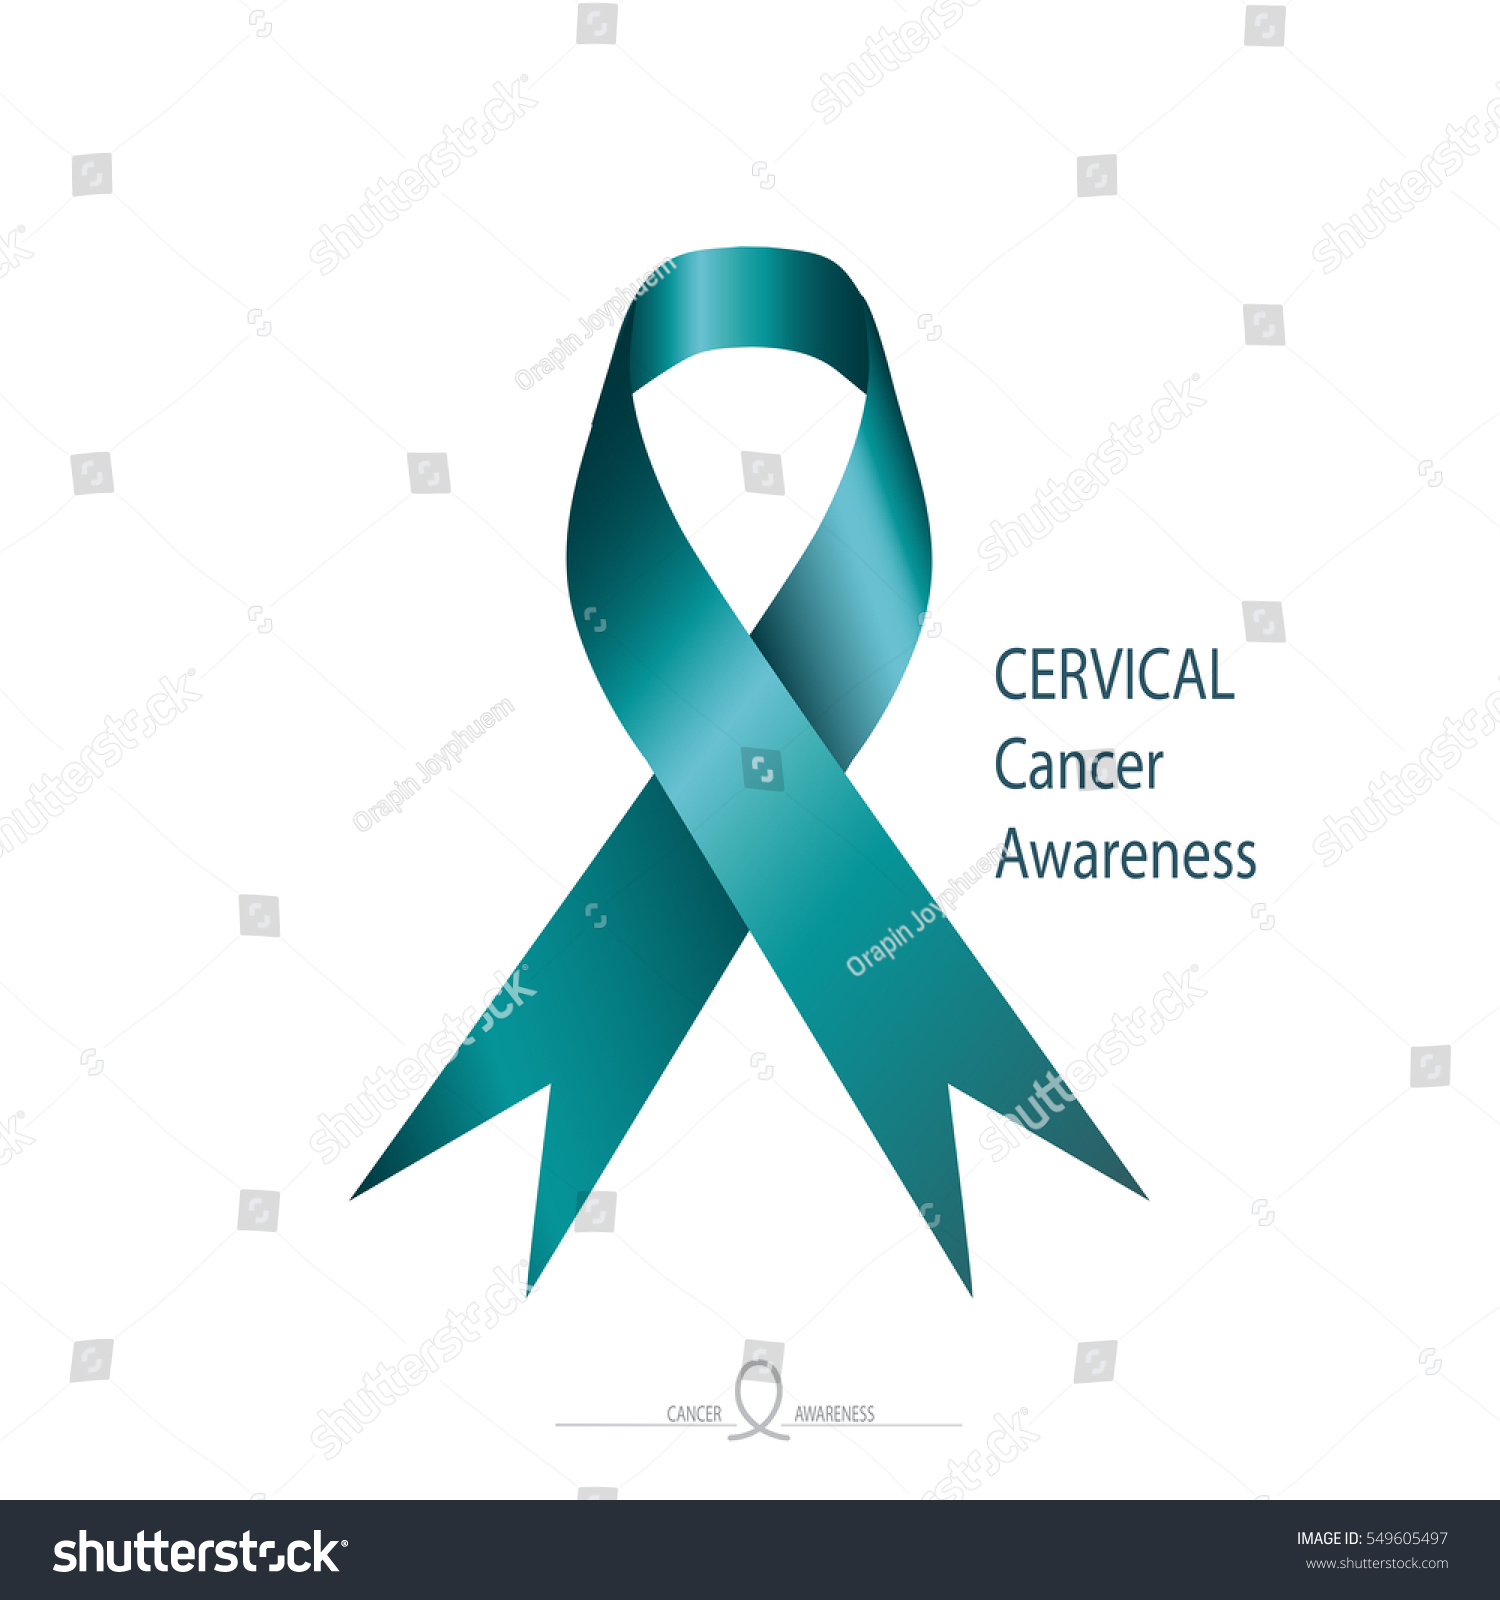 Cervical Cancer Awareness Teal Blue Green Stock Vector (Royalty Free ...